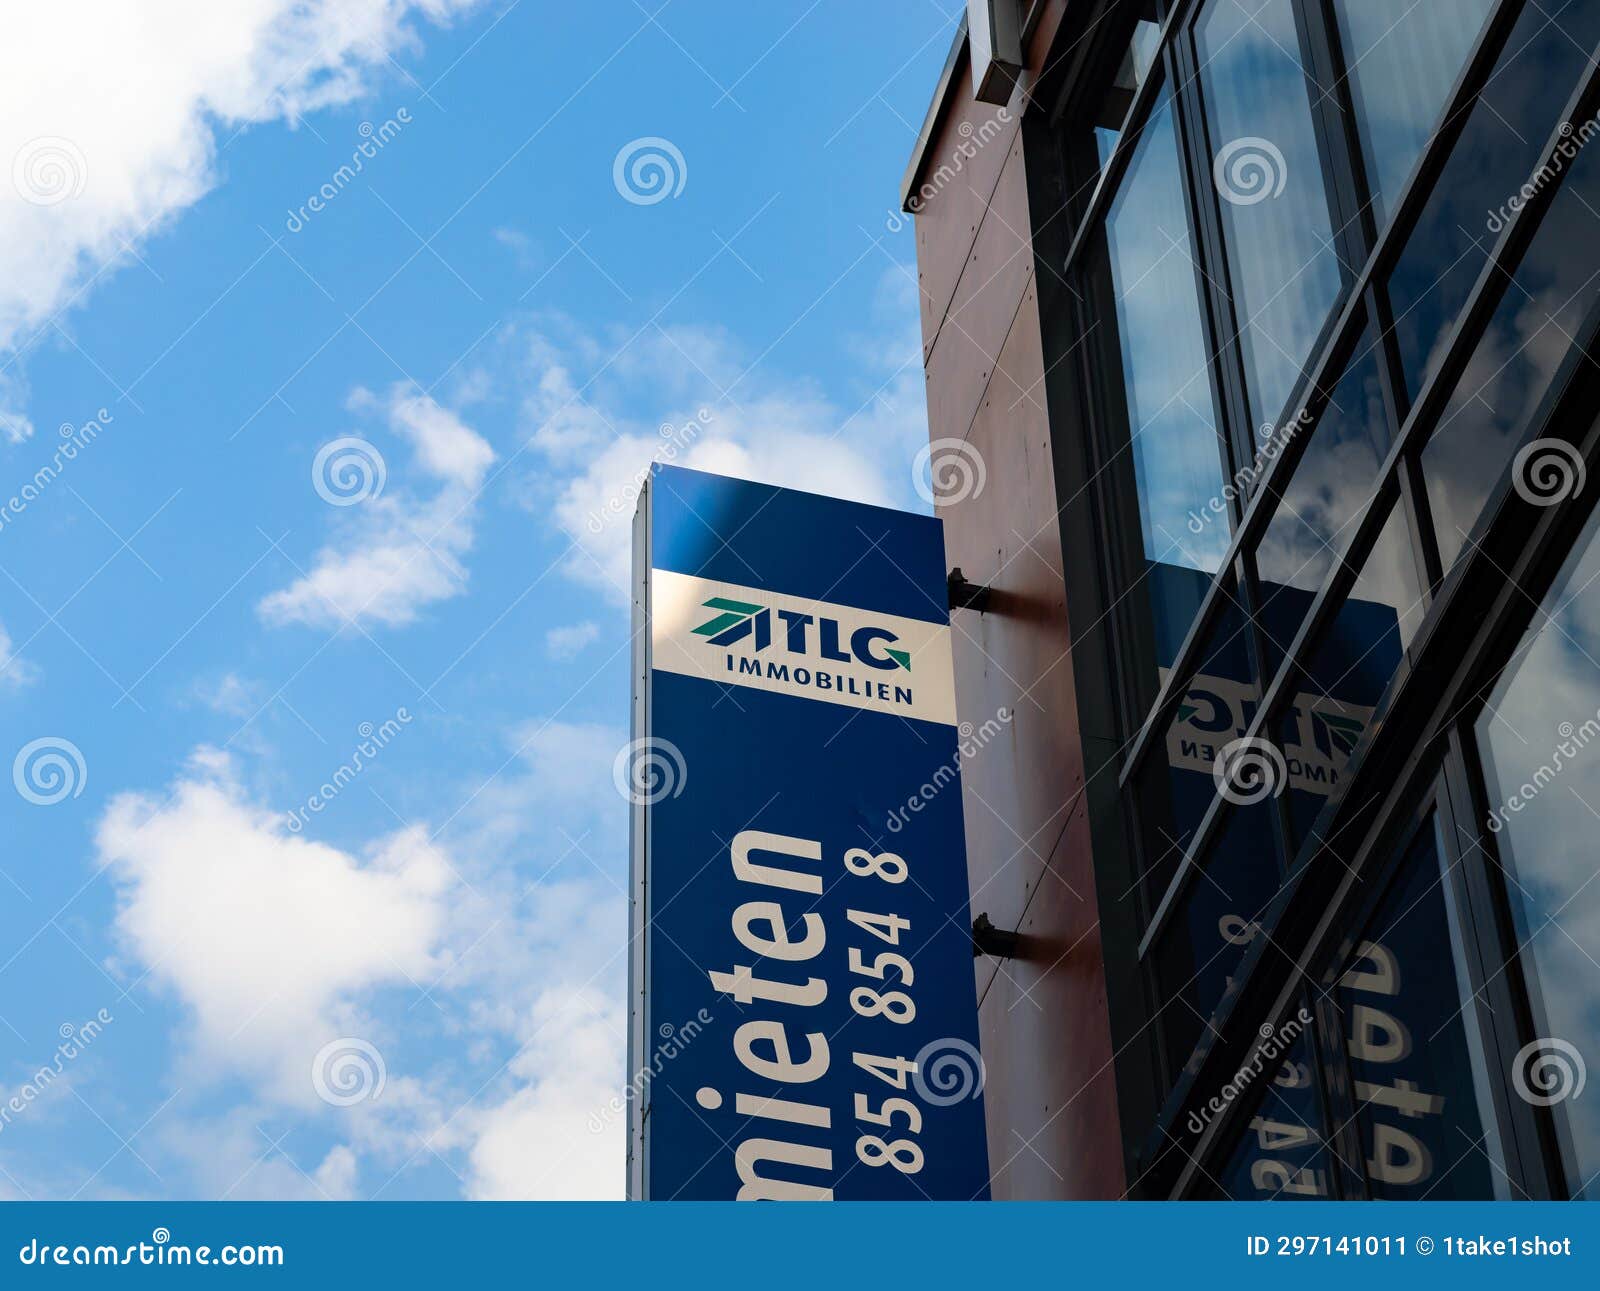 TLG Immobilien Logo Sign editorial photo. Image of building - 297141011